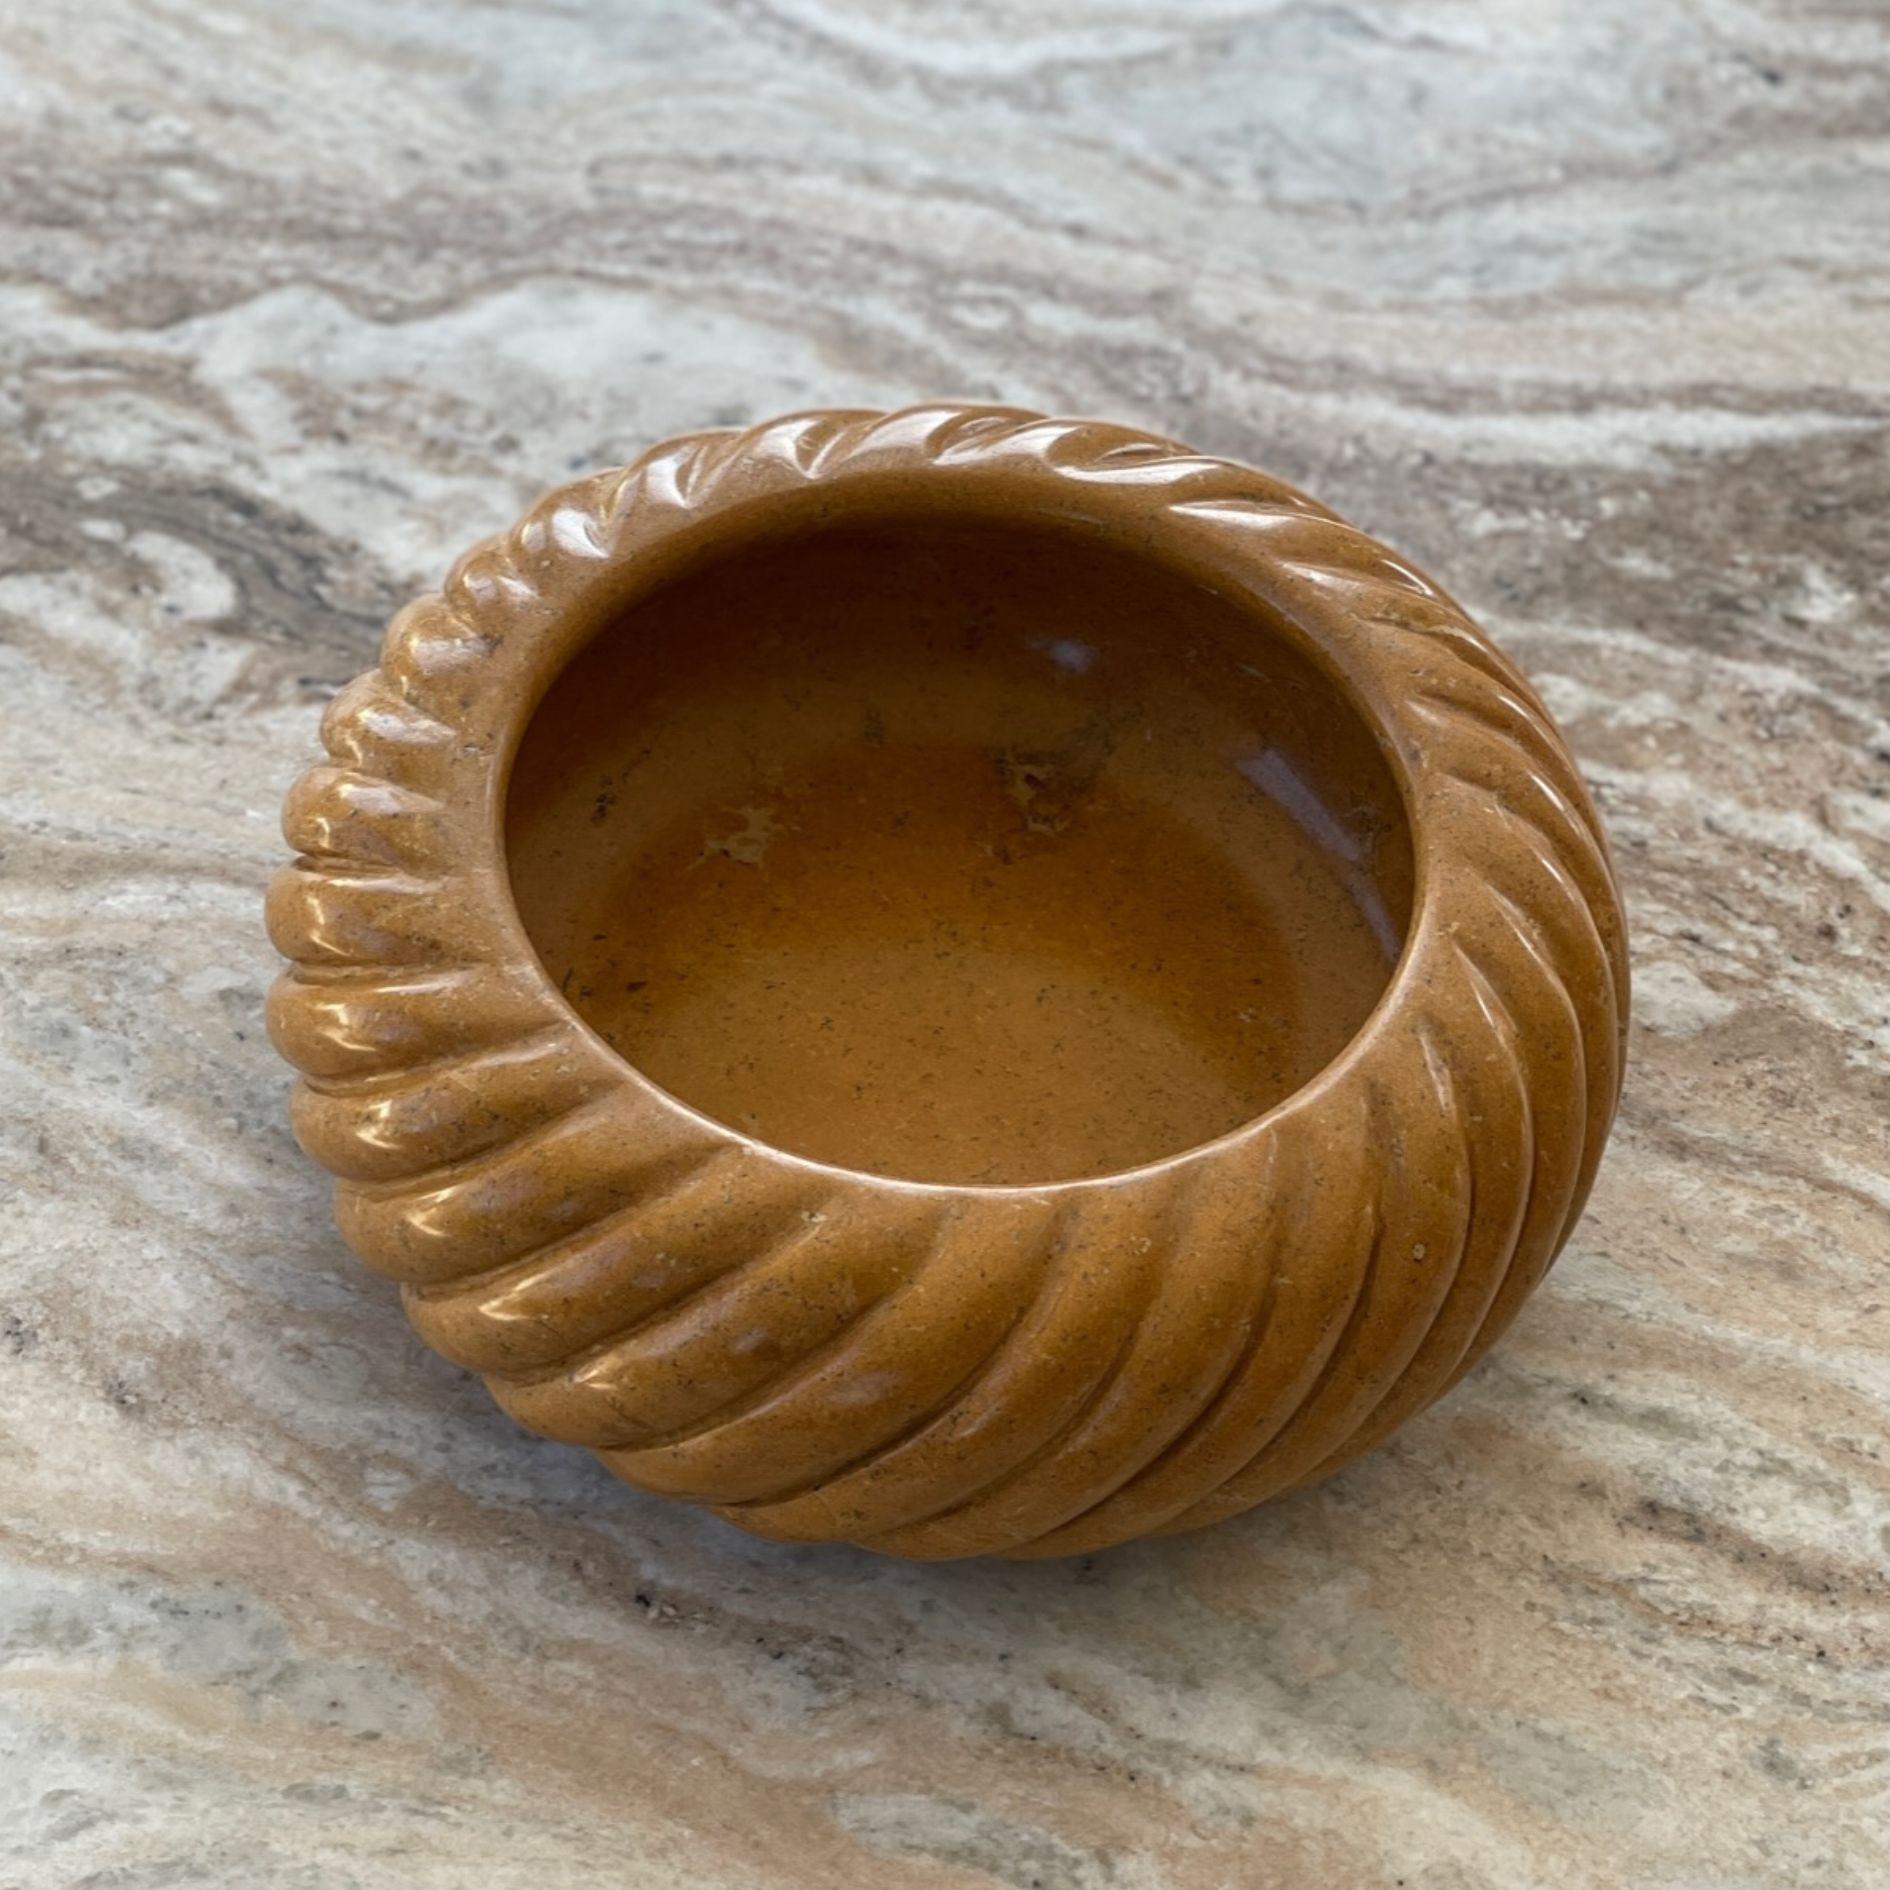 Cruller Bowl is a limited edition functional object d'art carved from a single cube of Jaisalmer Stone. Hand-finished by a growing artisan atelier in Rajasthan, India it is produced exclusively by Anastasio Home. Inspired by the famous French